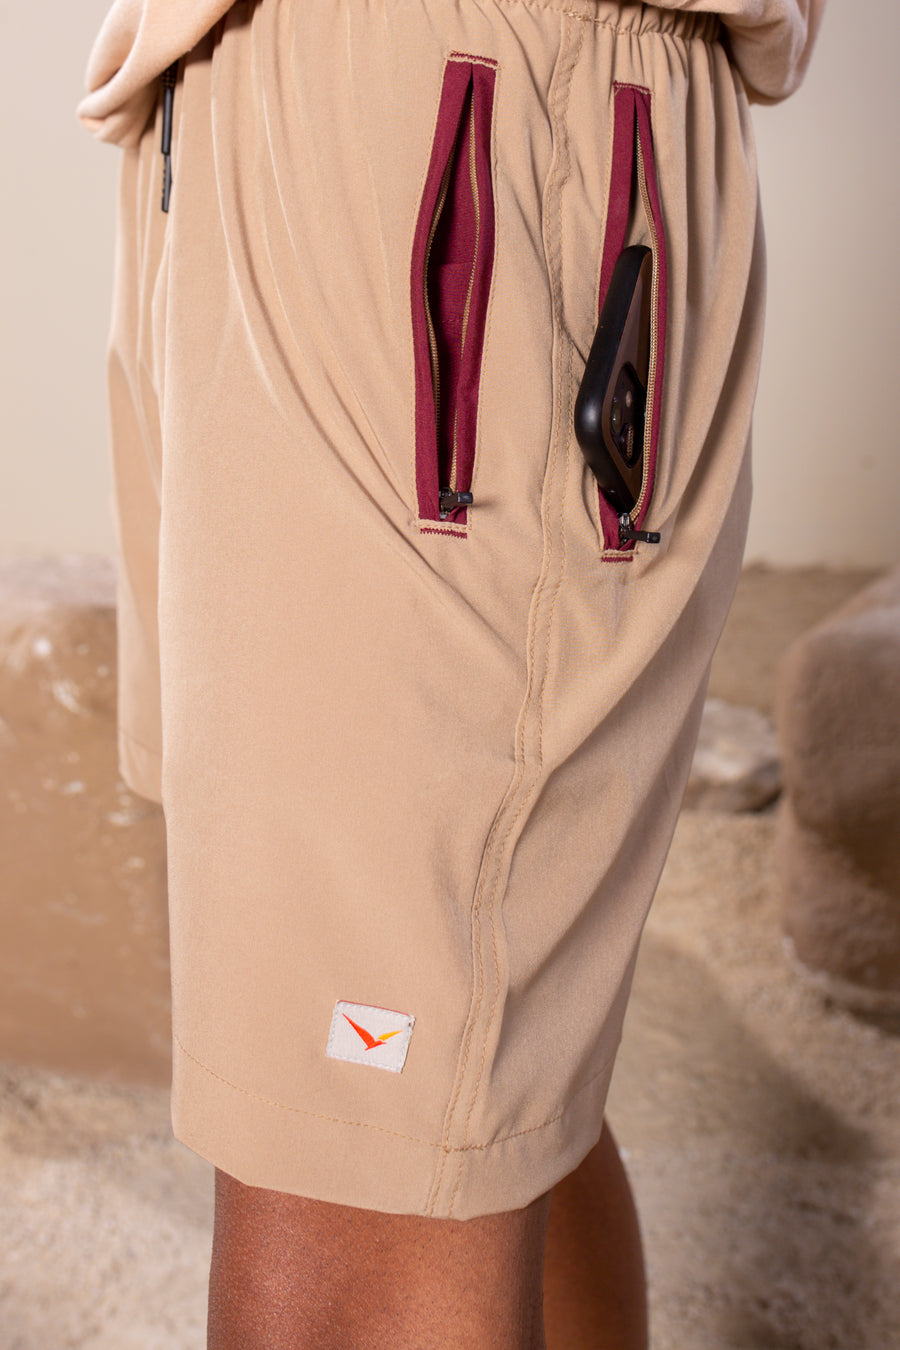 Men's Flight Shorts in Tan | VOLO Apparel | Designed so you can feel fly and completely secure, the Flight Shorts 2.0 are made with an ultralight micro stretch fabric that is quick drying and comes with a three zipper pocket design. The smart pocket tech makes it so your stuff won’t bounce when you do. Reinforced stitching so it can handle everything you will throw at it. The one short for your every adventure.